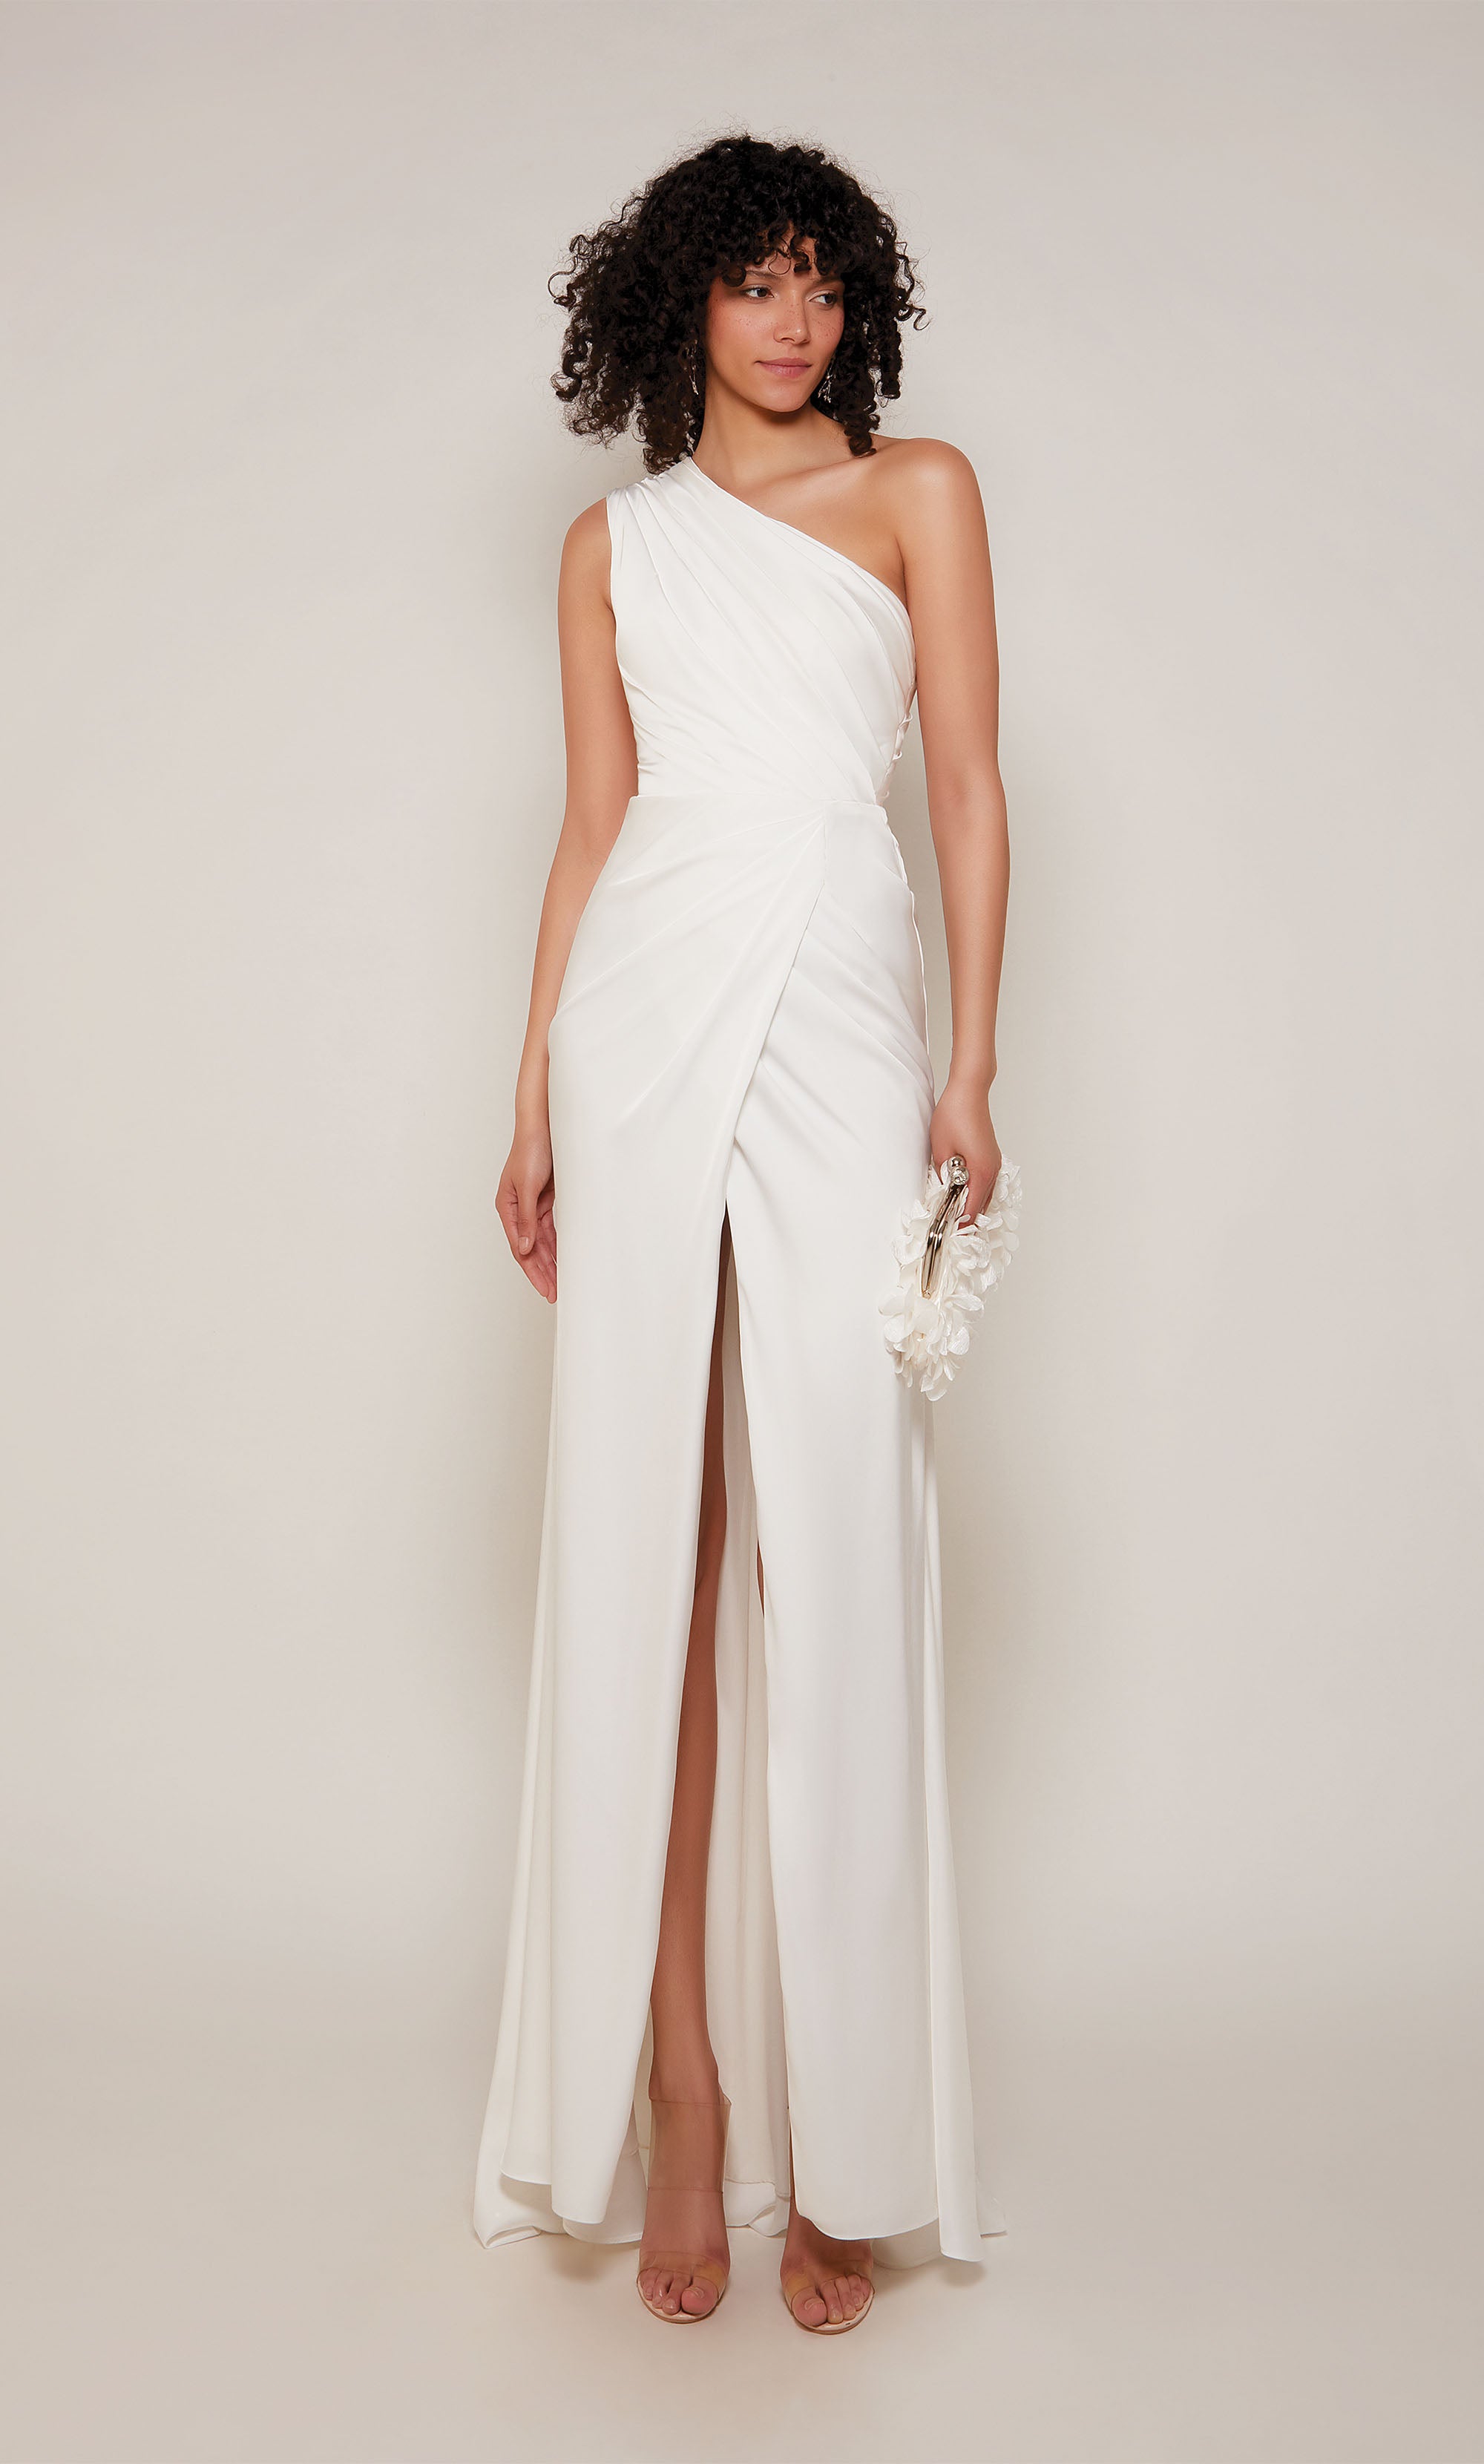 An elegant, satin one shoulder gown with ruching detail and front slit, in the color diamond white.